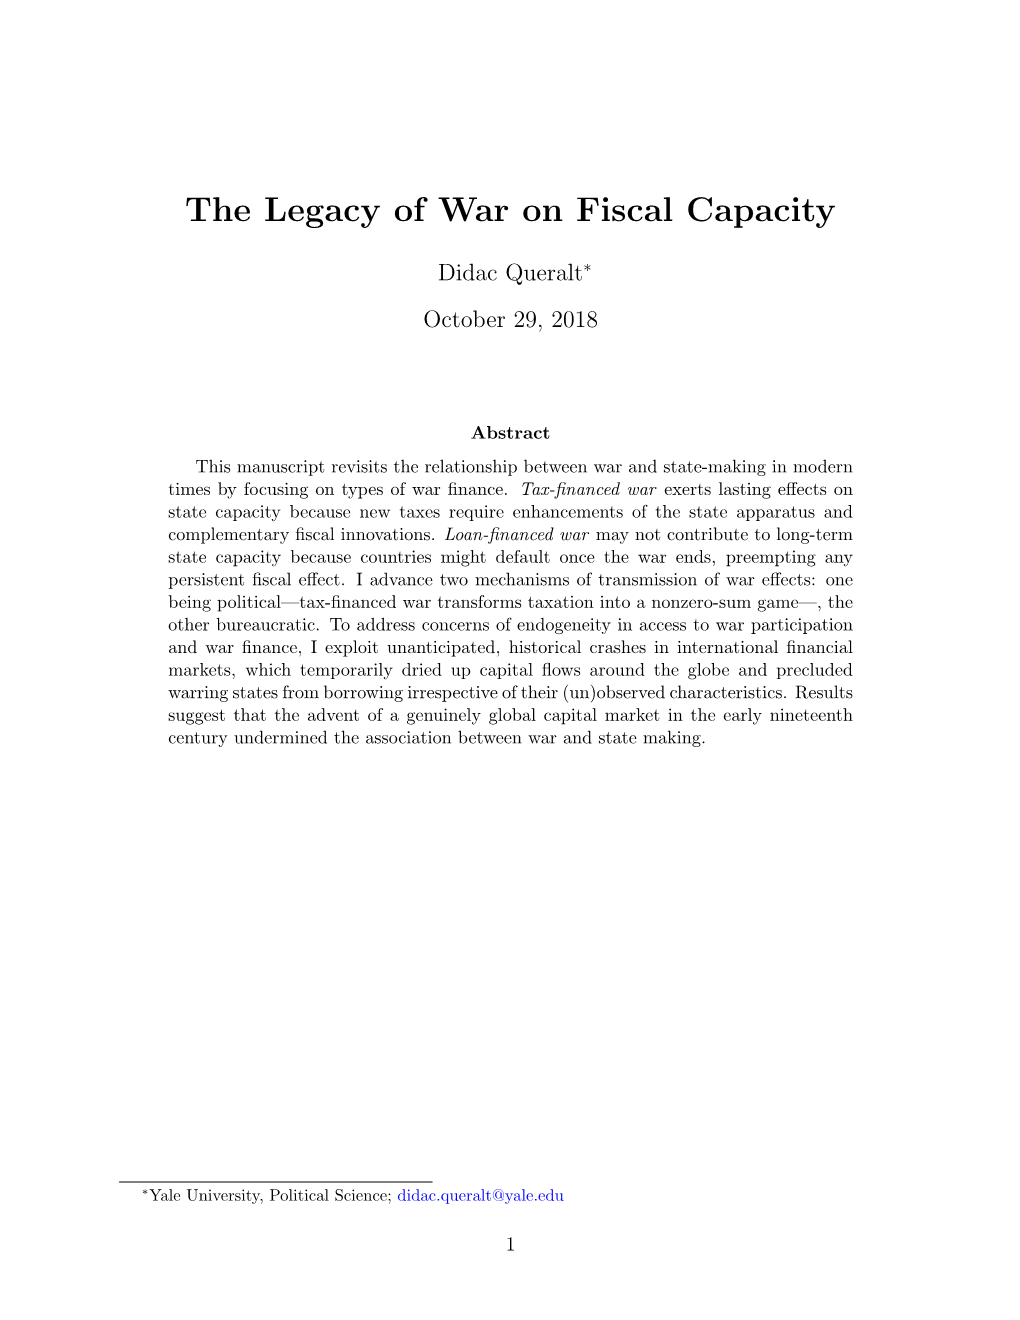 The Legacy of War on Fiscal Capacity